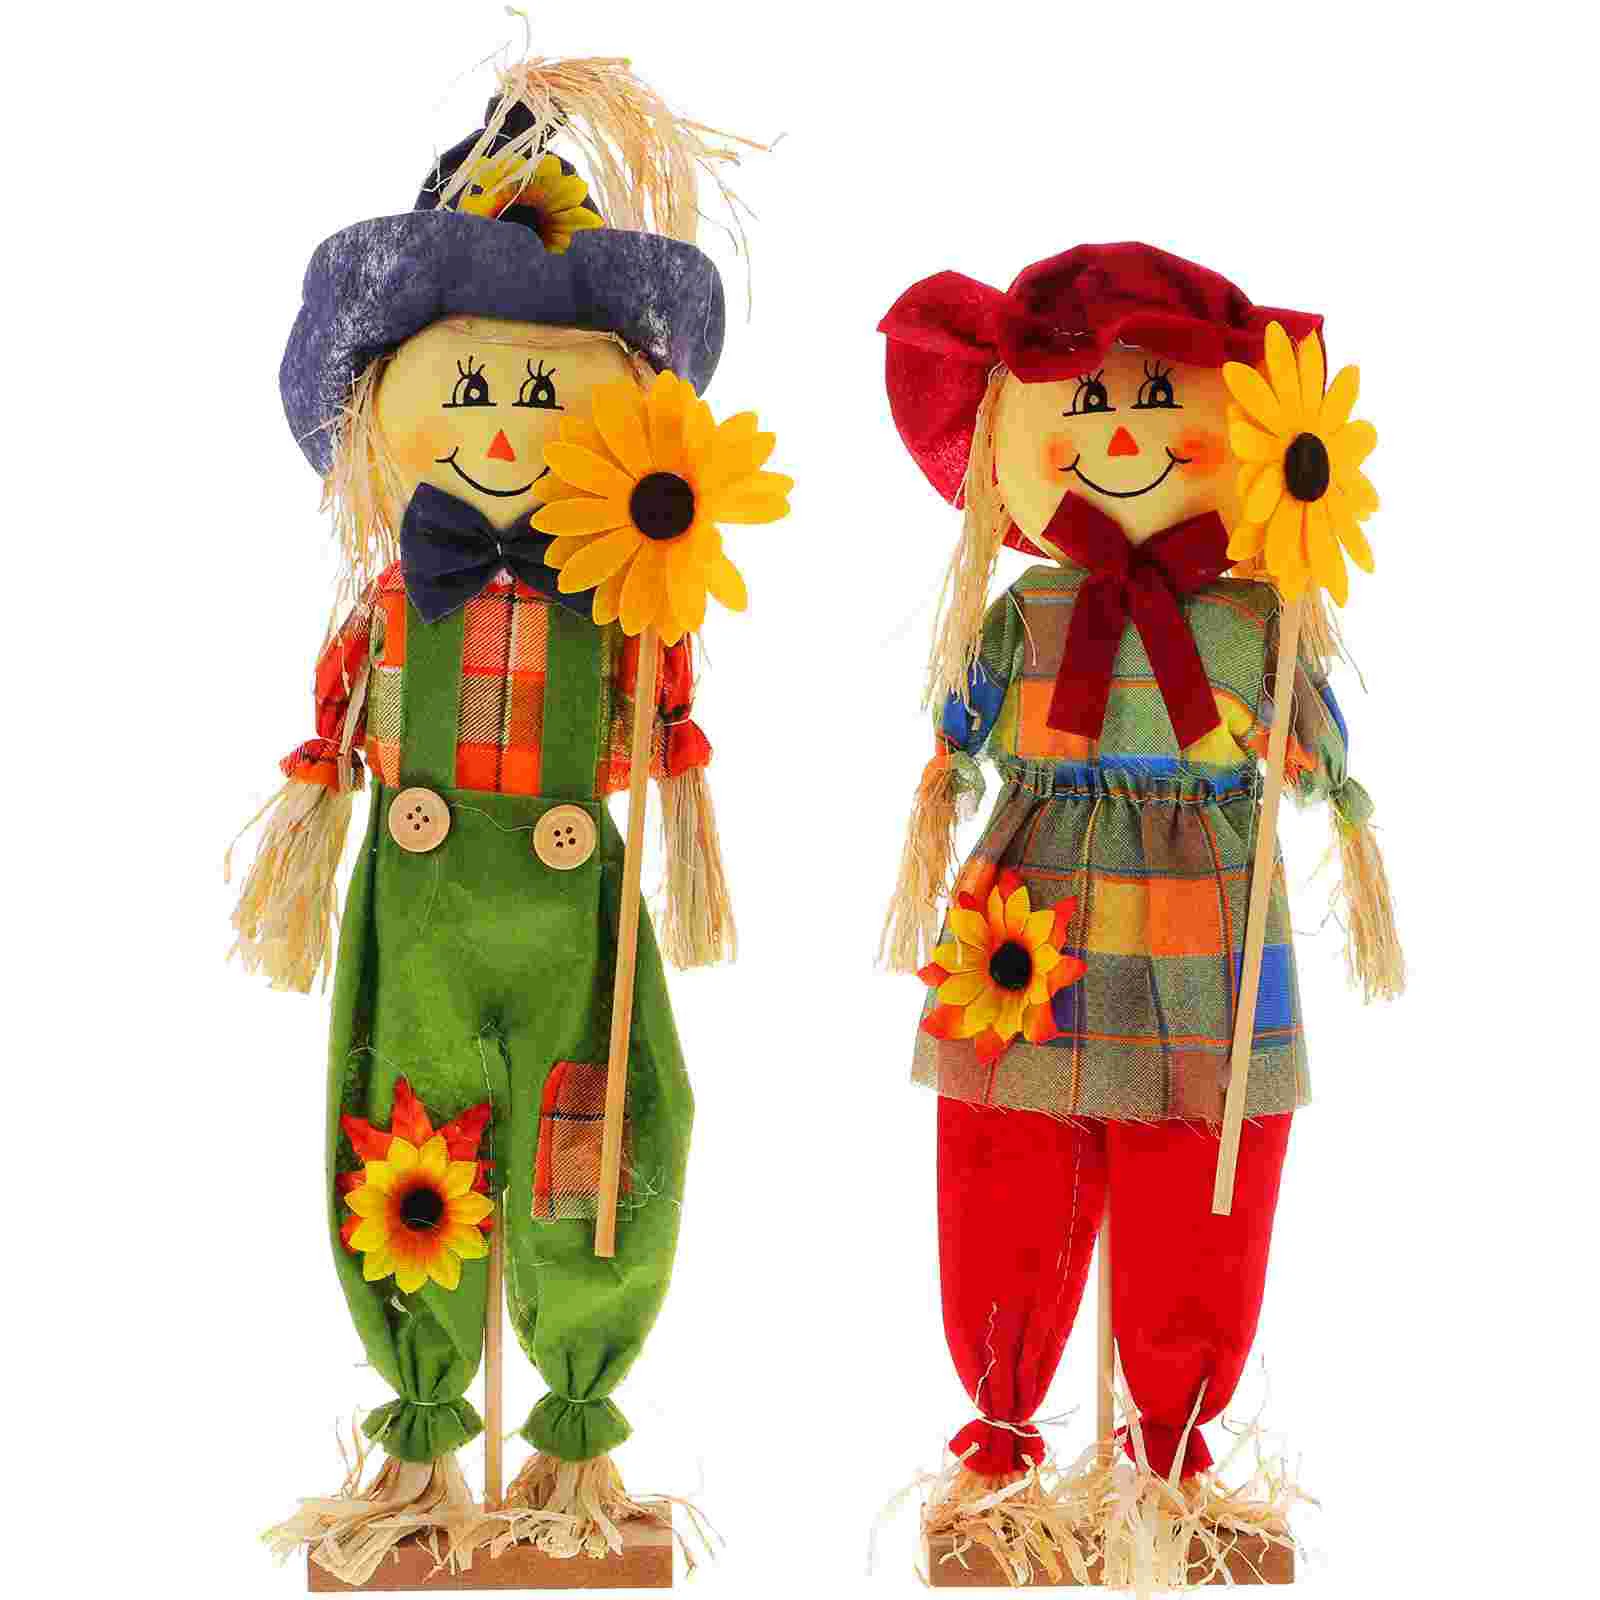 

Halloween Scarecrow Ornaments Adorable Scarecrow Decors for Garden Party Decoration Yard Lawn Signs Scene Layout Ornament